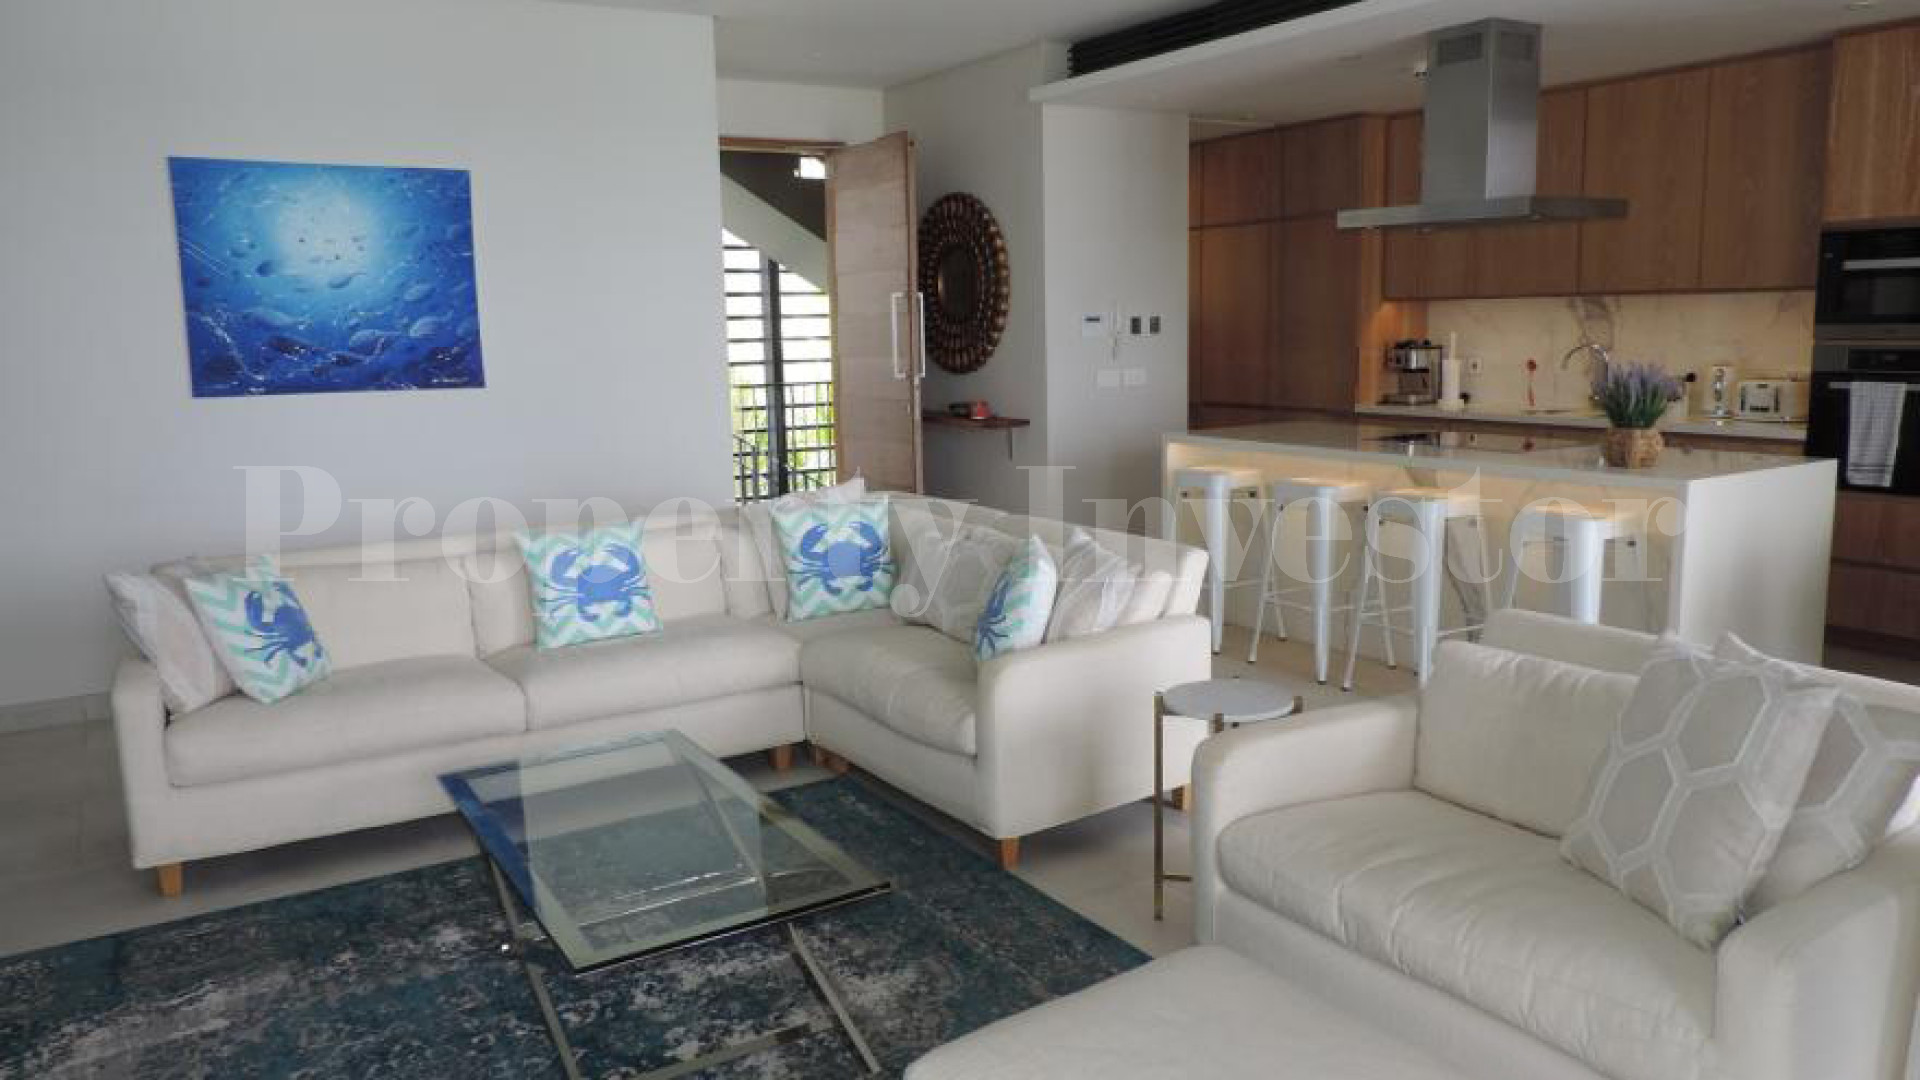 Exclusive 3 Bedroom Luxury Designer Beachfront Apartment with Spectacular Sea Views for Sale in Mahé, Seychelles